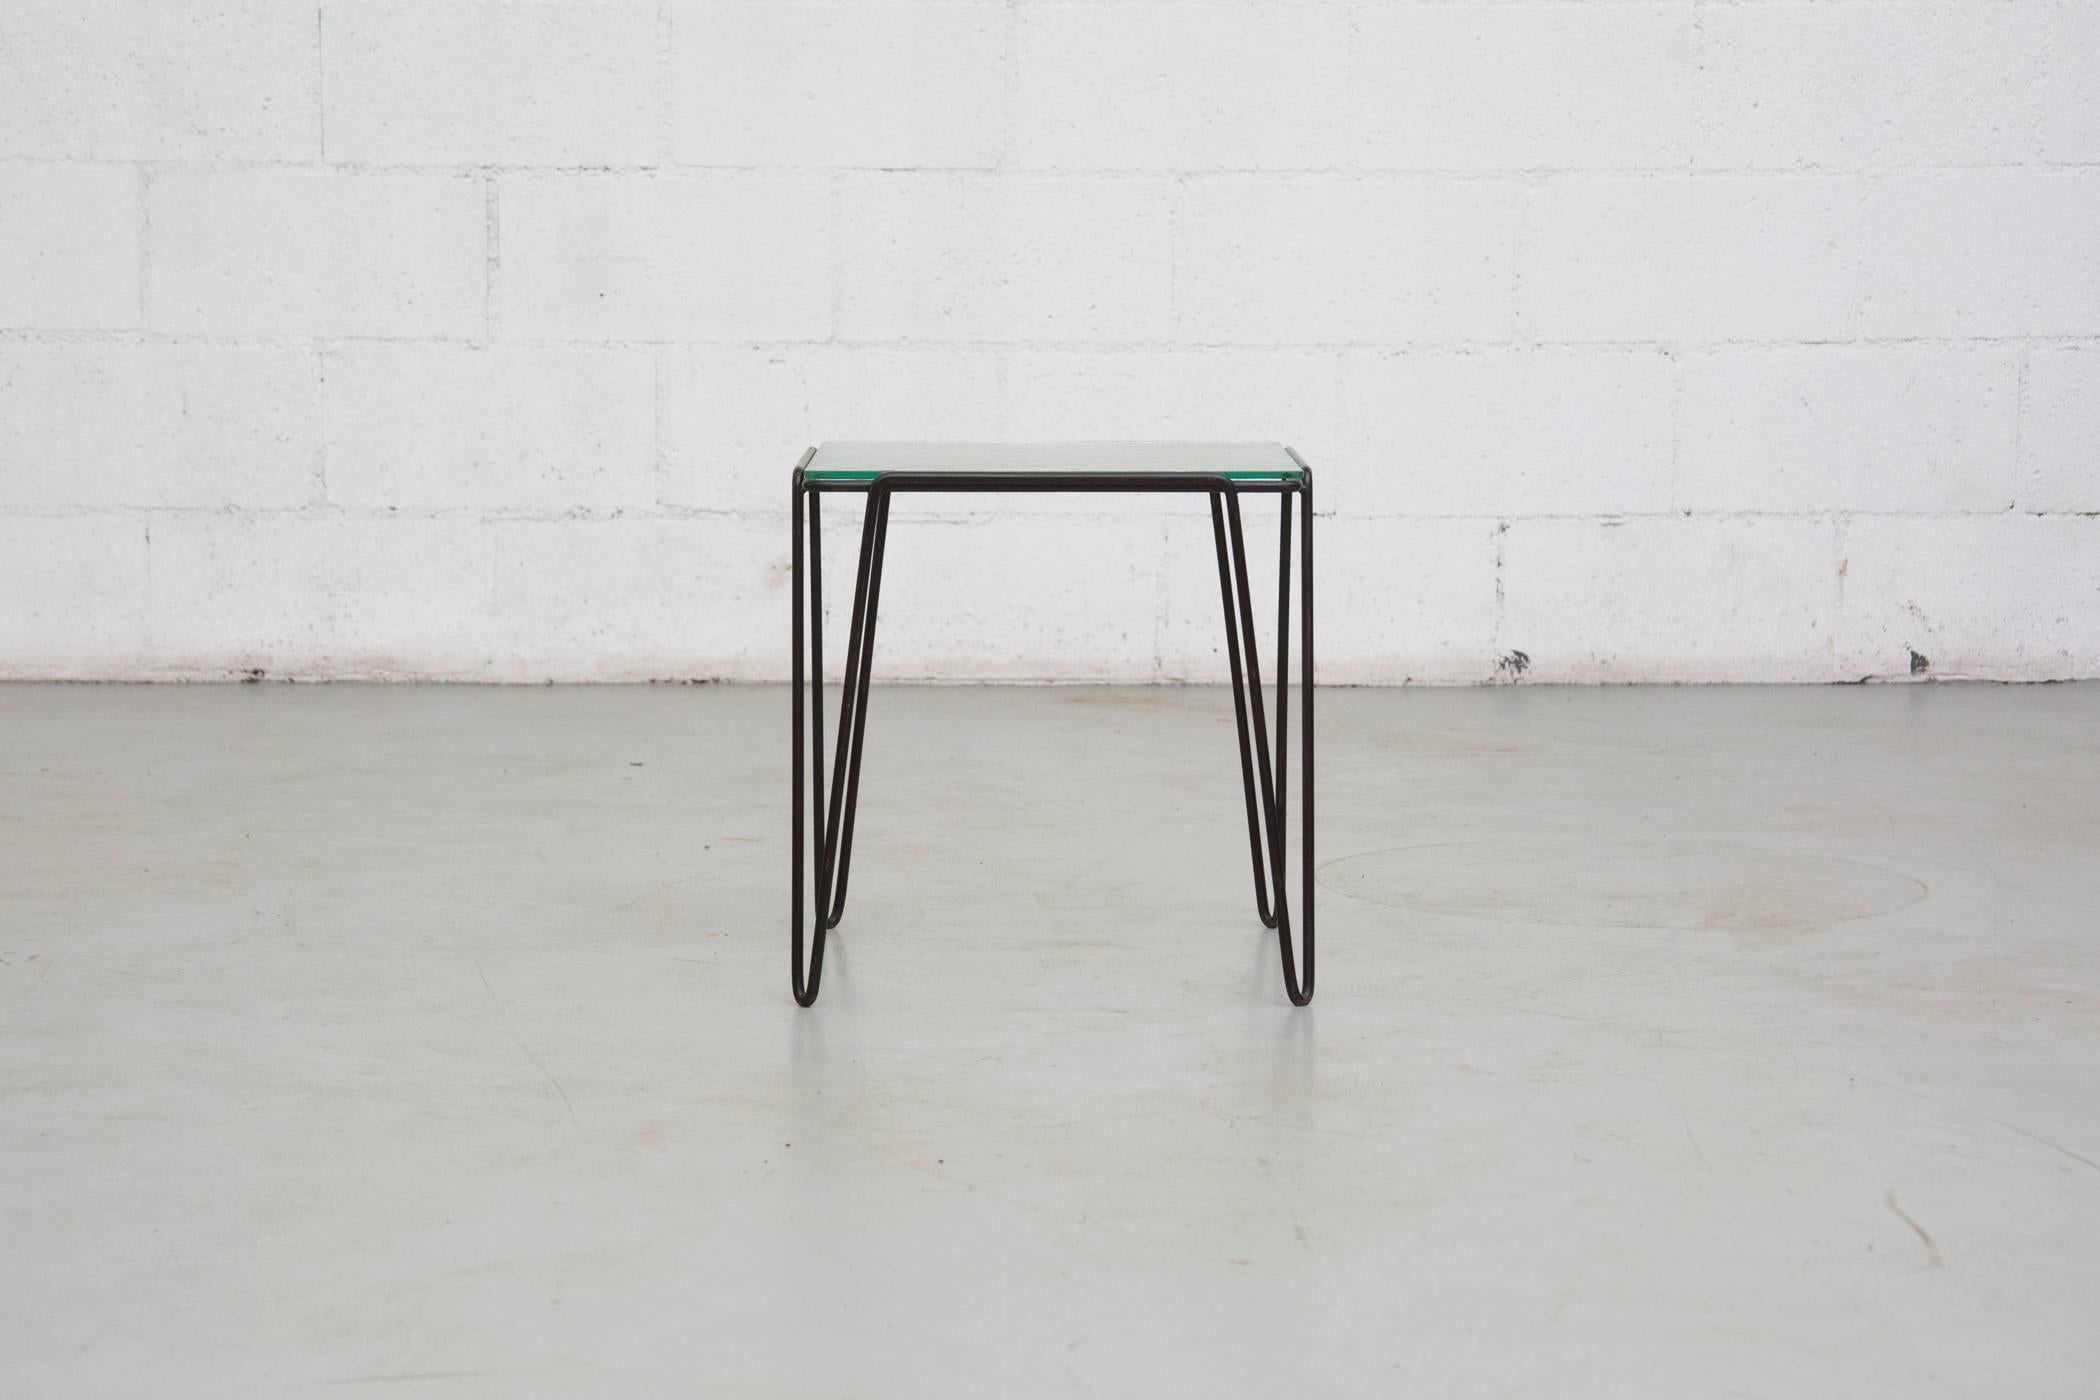 Black metal frame with hairpin style leg and textured glass top. This series of tables was designed during the 1950s by Arnold Bueno de Mesquita and manufactured in the Netherlands by Spurs Meubelen. Visible wear to frame and glass, consistent with